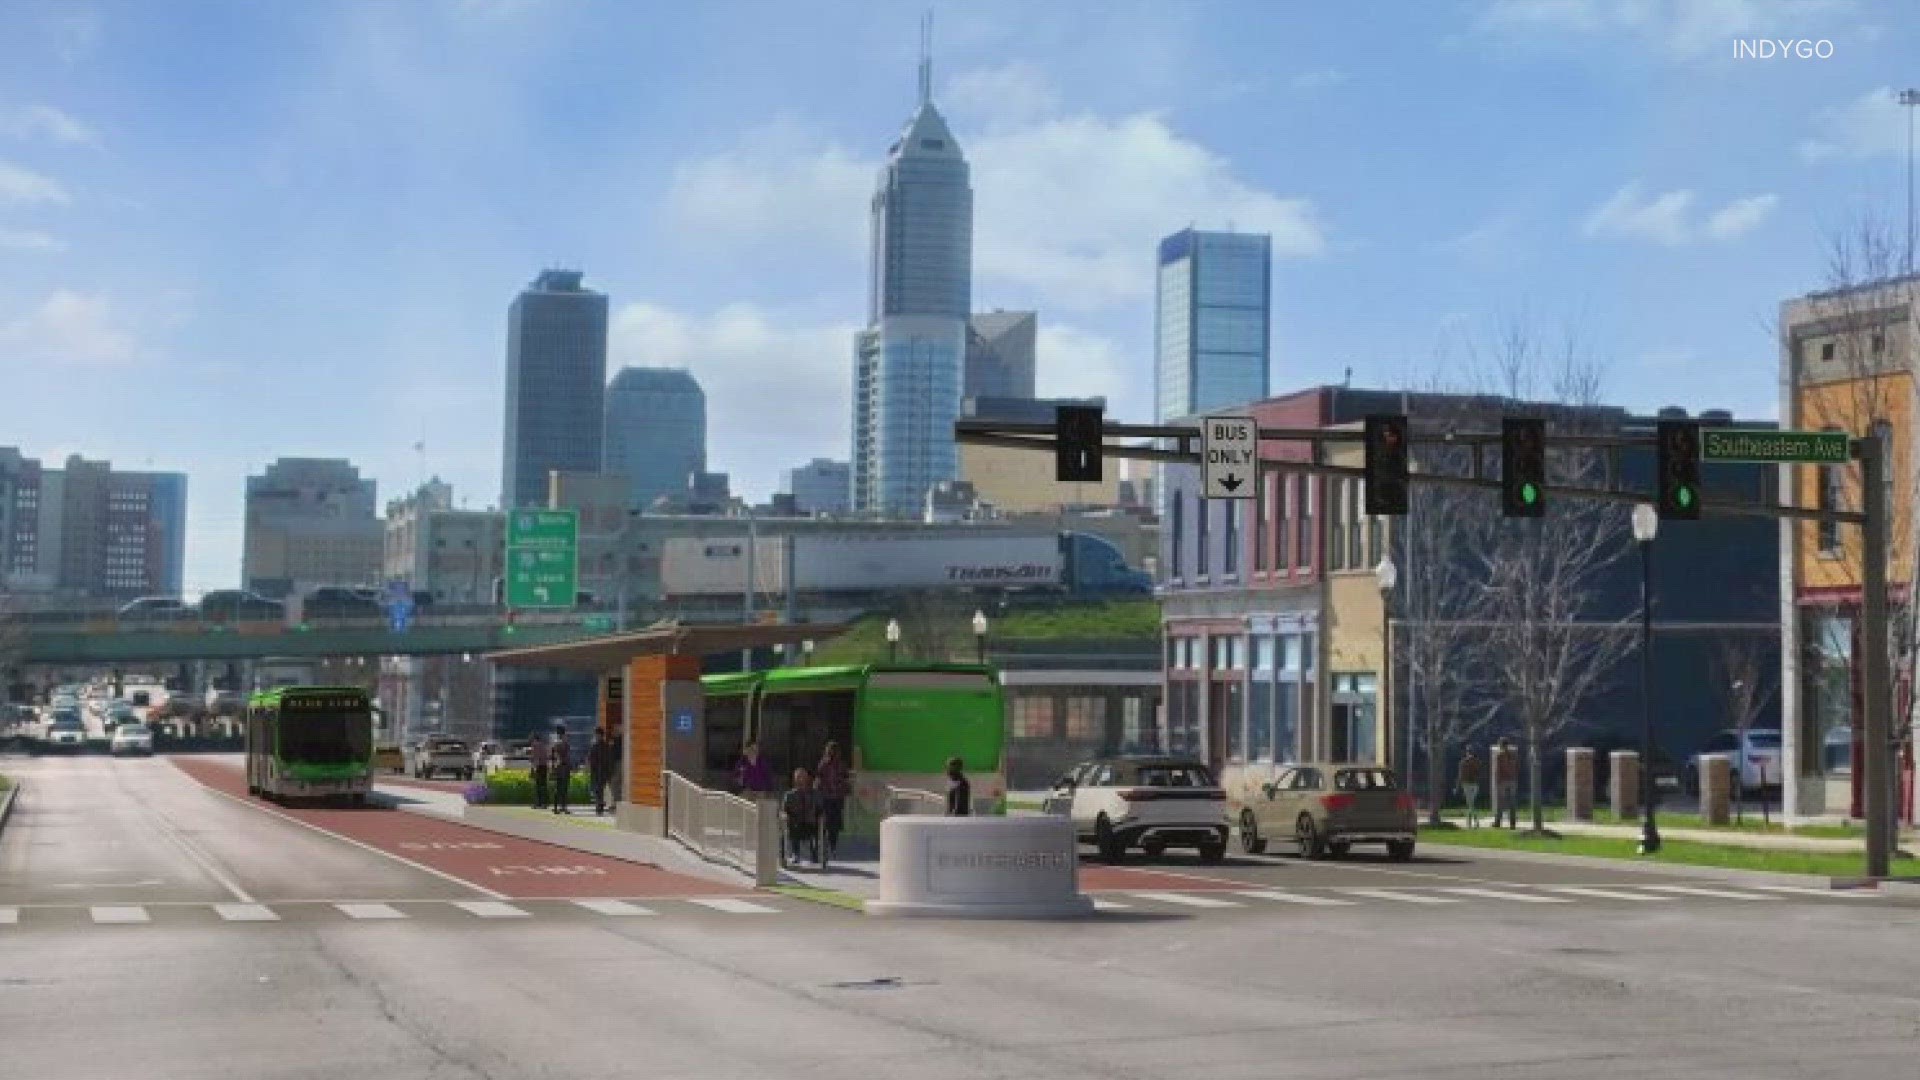 IndyGo agreed to listen to traffic concerns so that the bill would not move forward.